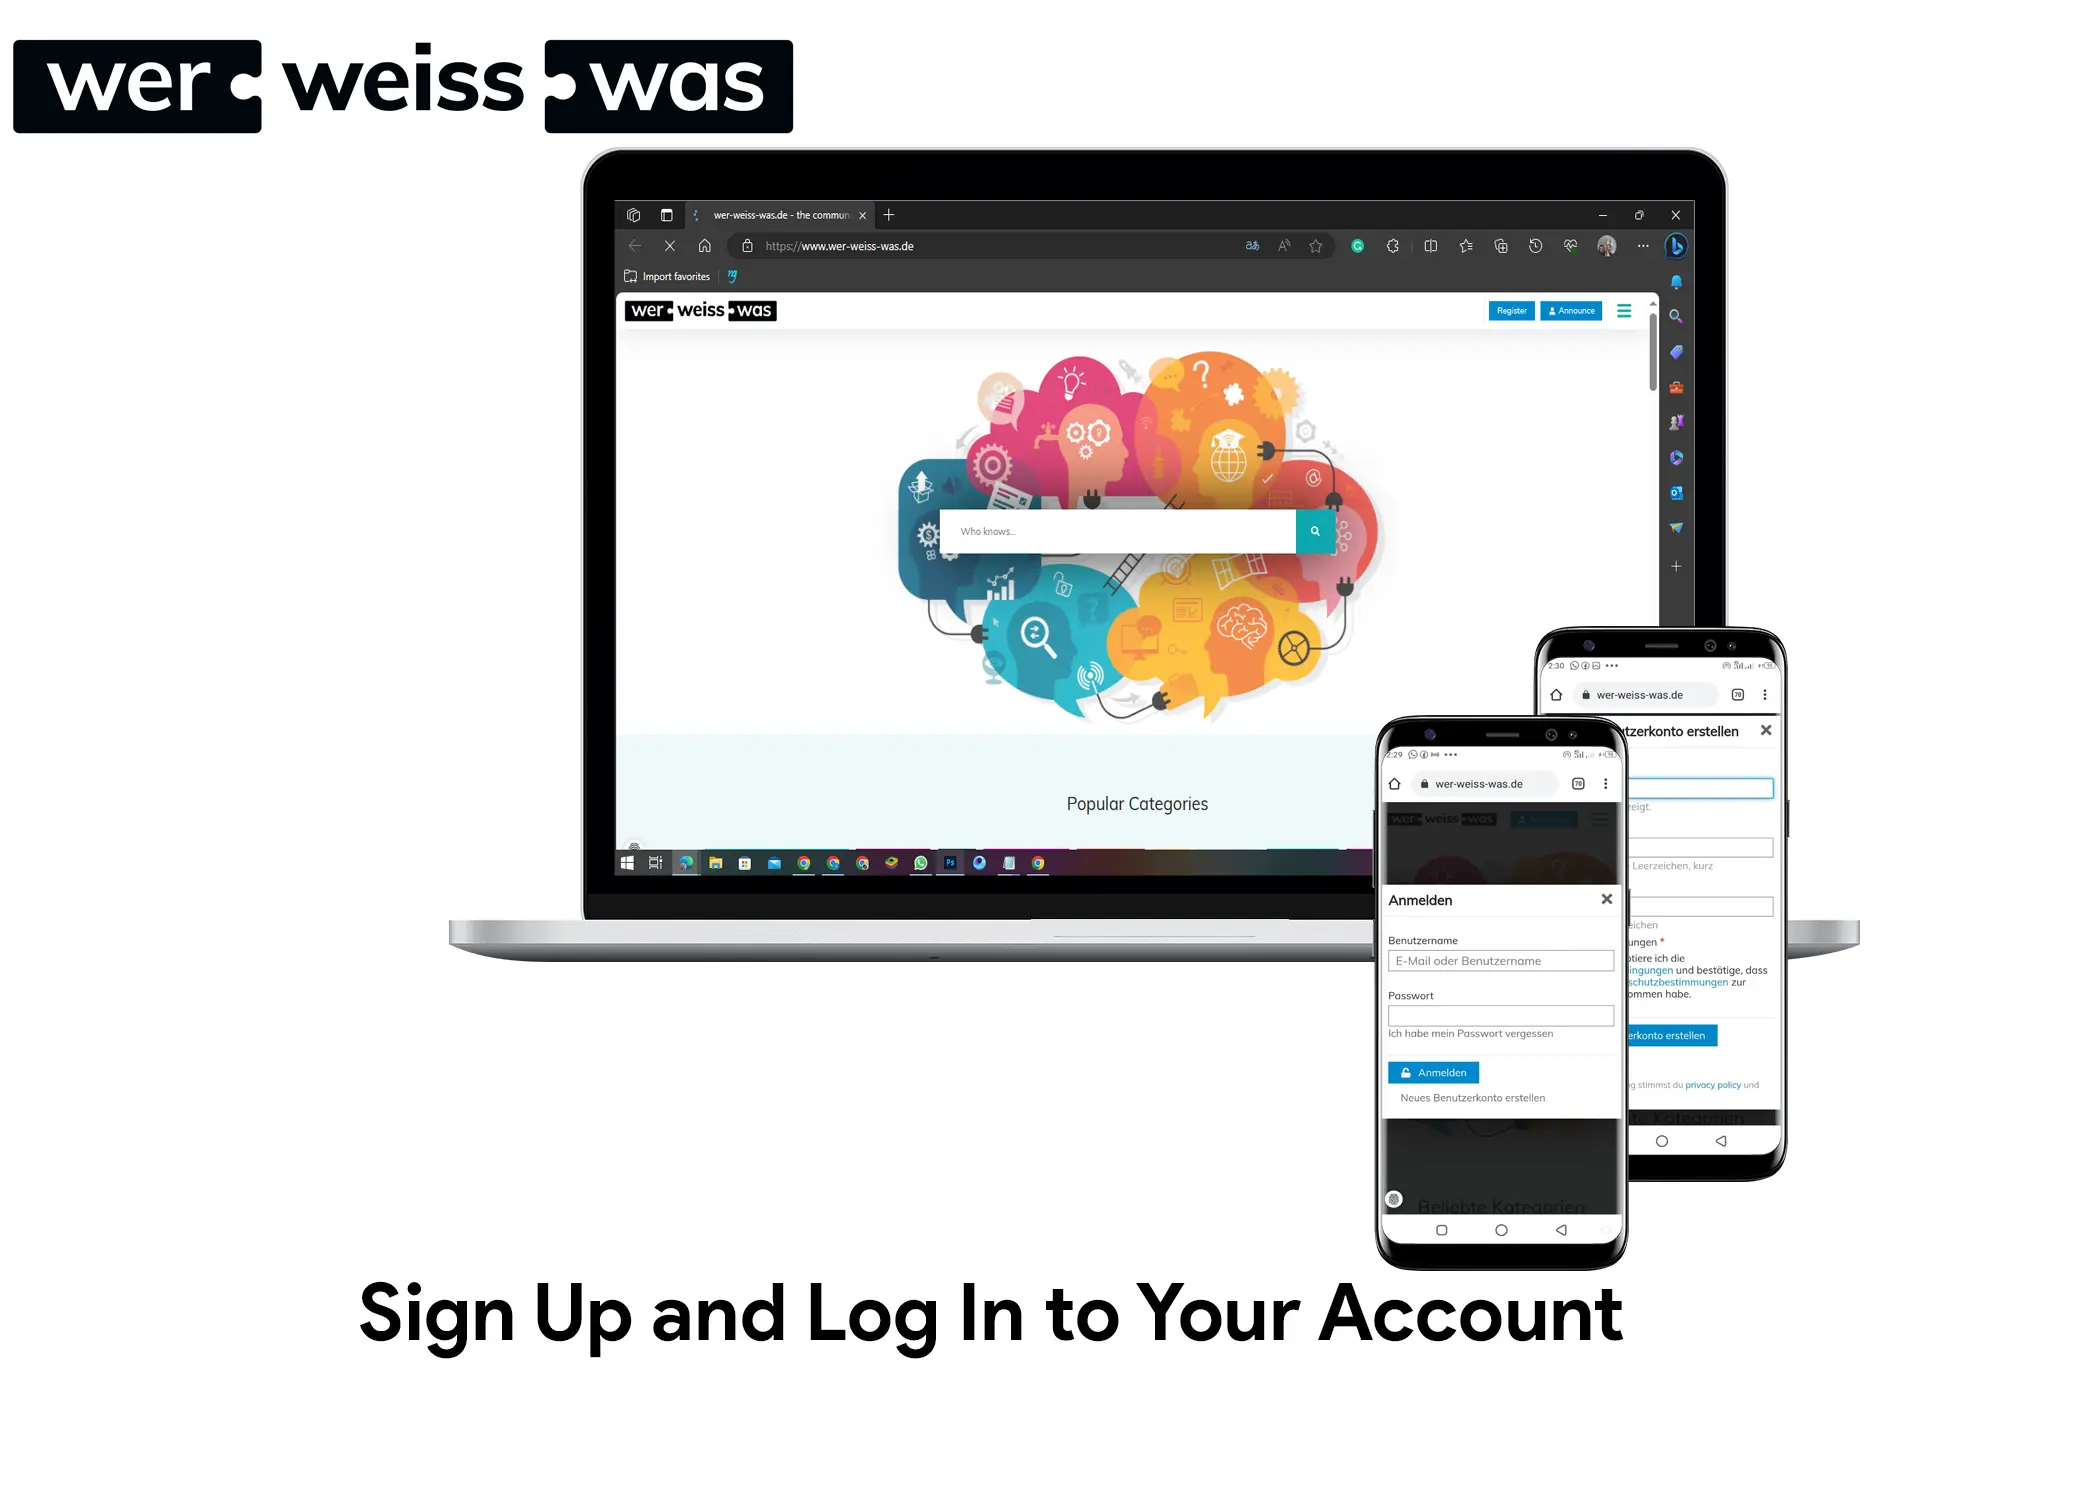 Wer-Weiss-Was.de: How to Sign Up and Log In to Your Account